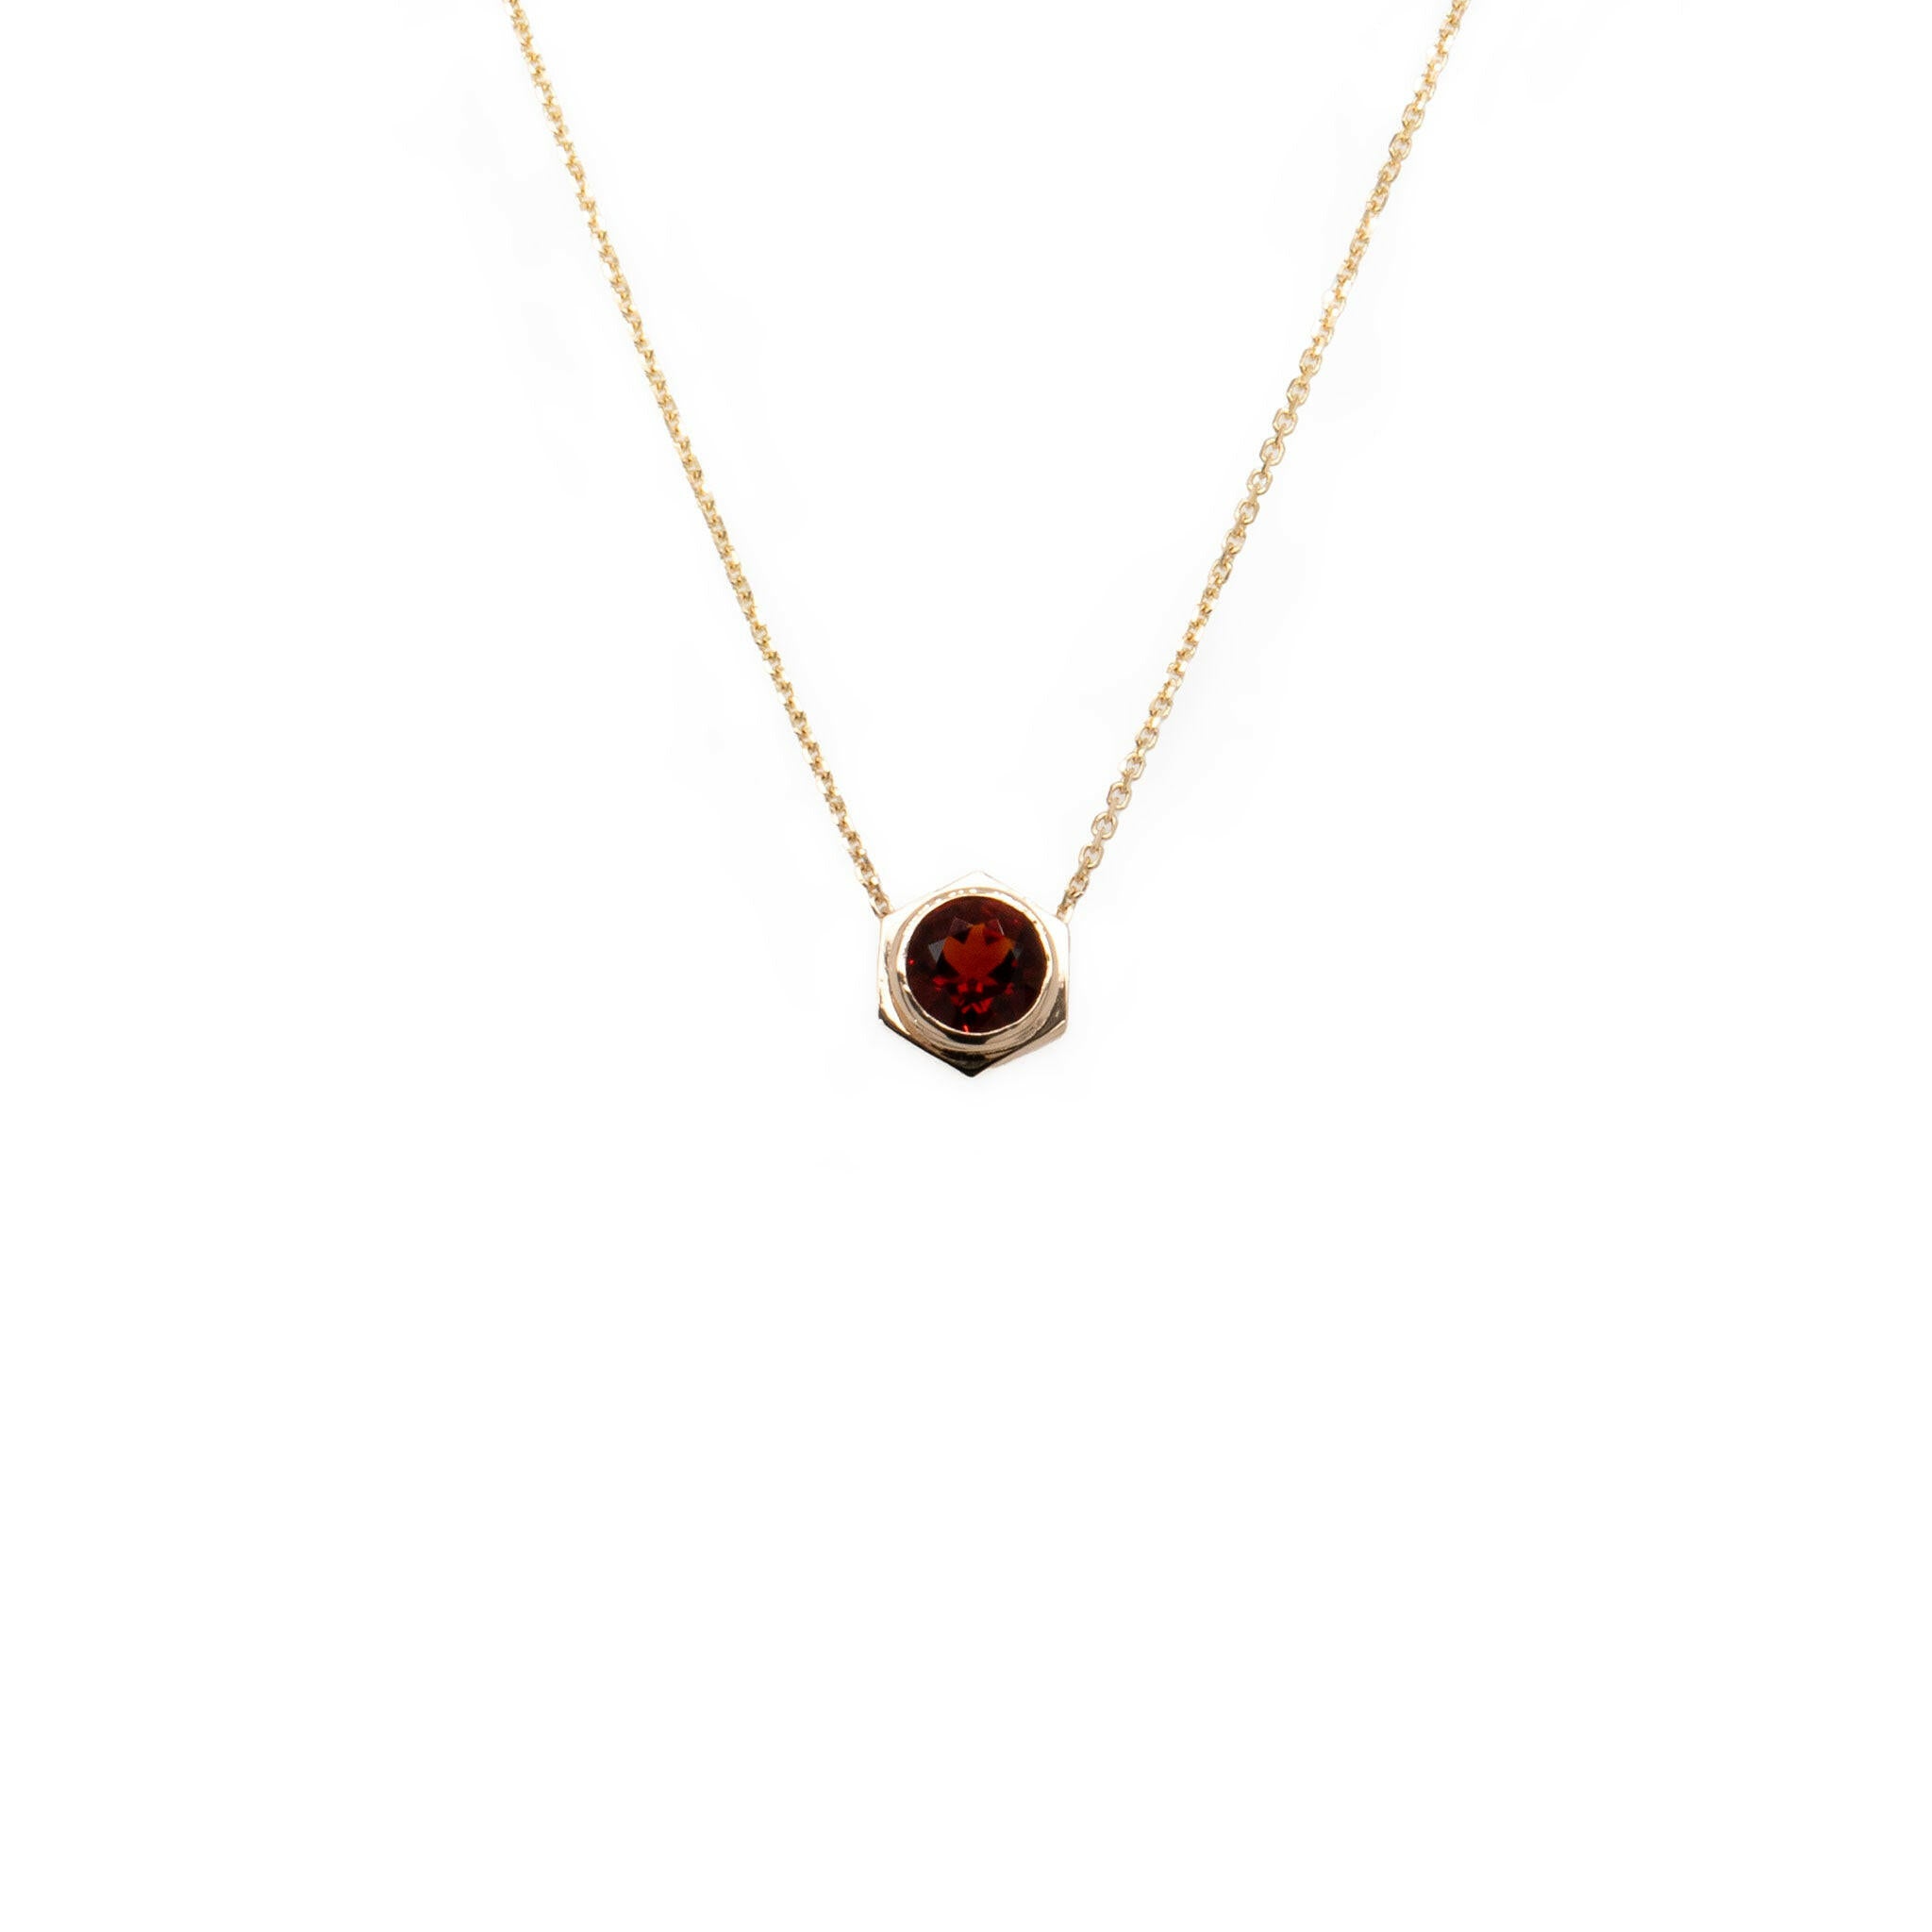 front view of bolt pendant with 14K yellow gold pendant necklace